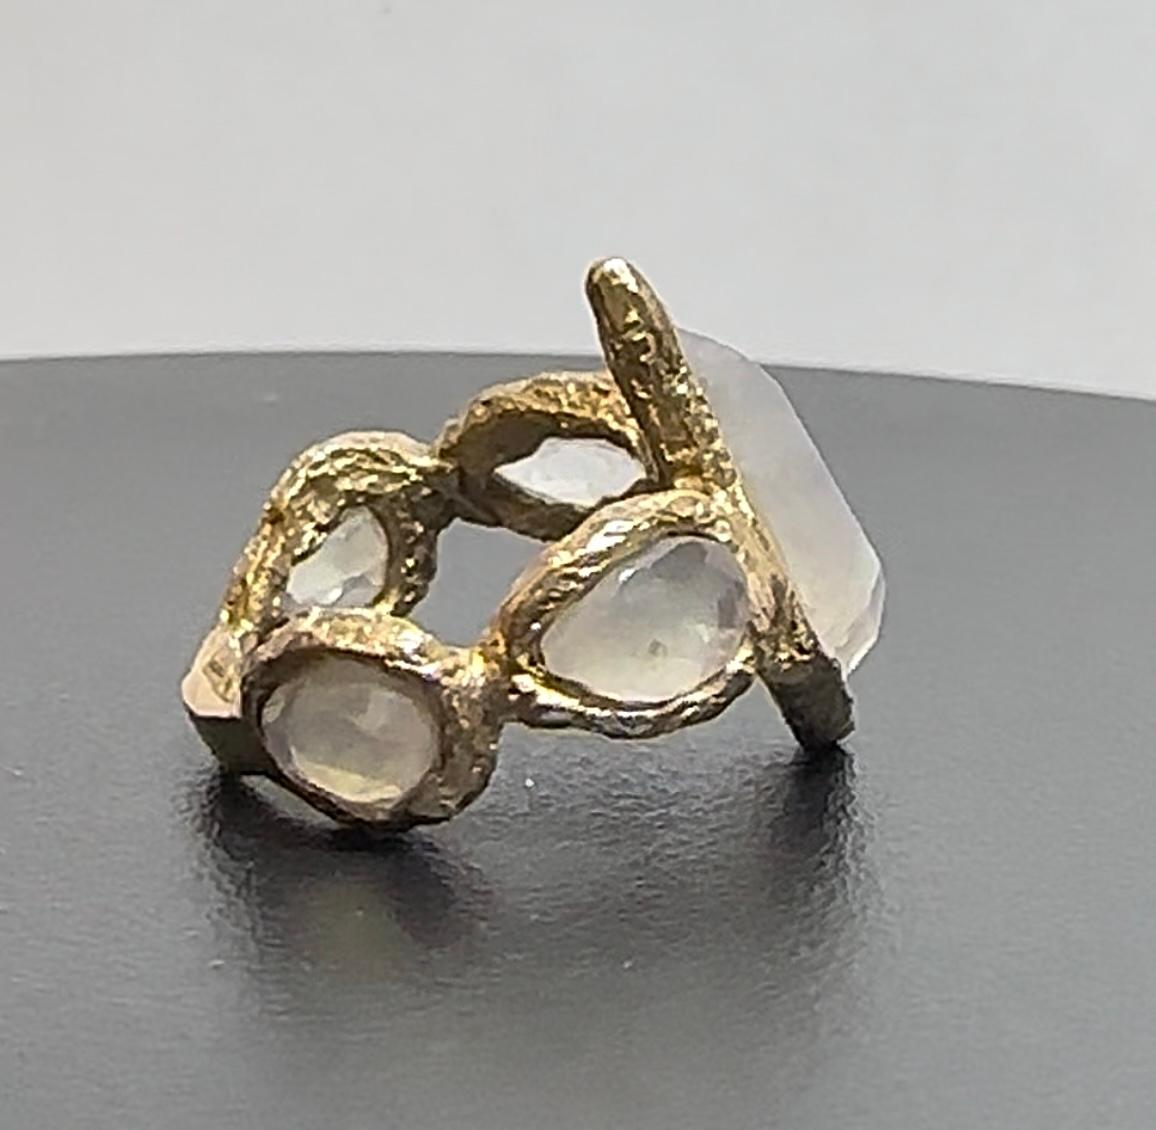 A one of a kind, beautiful, magical, deity inspired and handmade statement ring that has unique moonstones as protagonists and can be worn in different occasions. 

Ready to ship
Recycled 14K Yellow Gold
Currently size 6.5 but can be easily resized